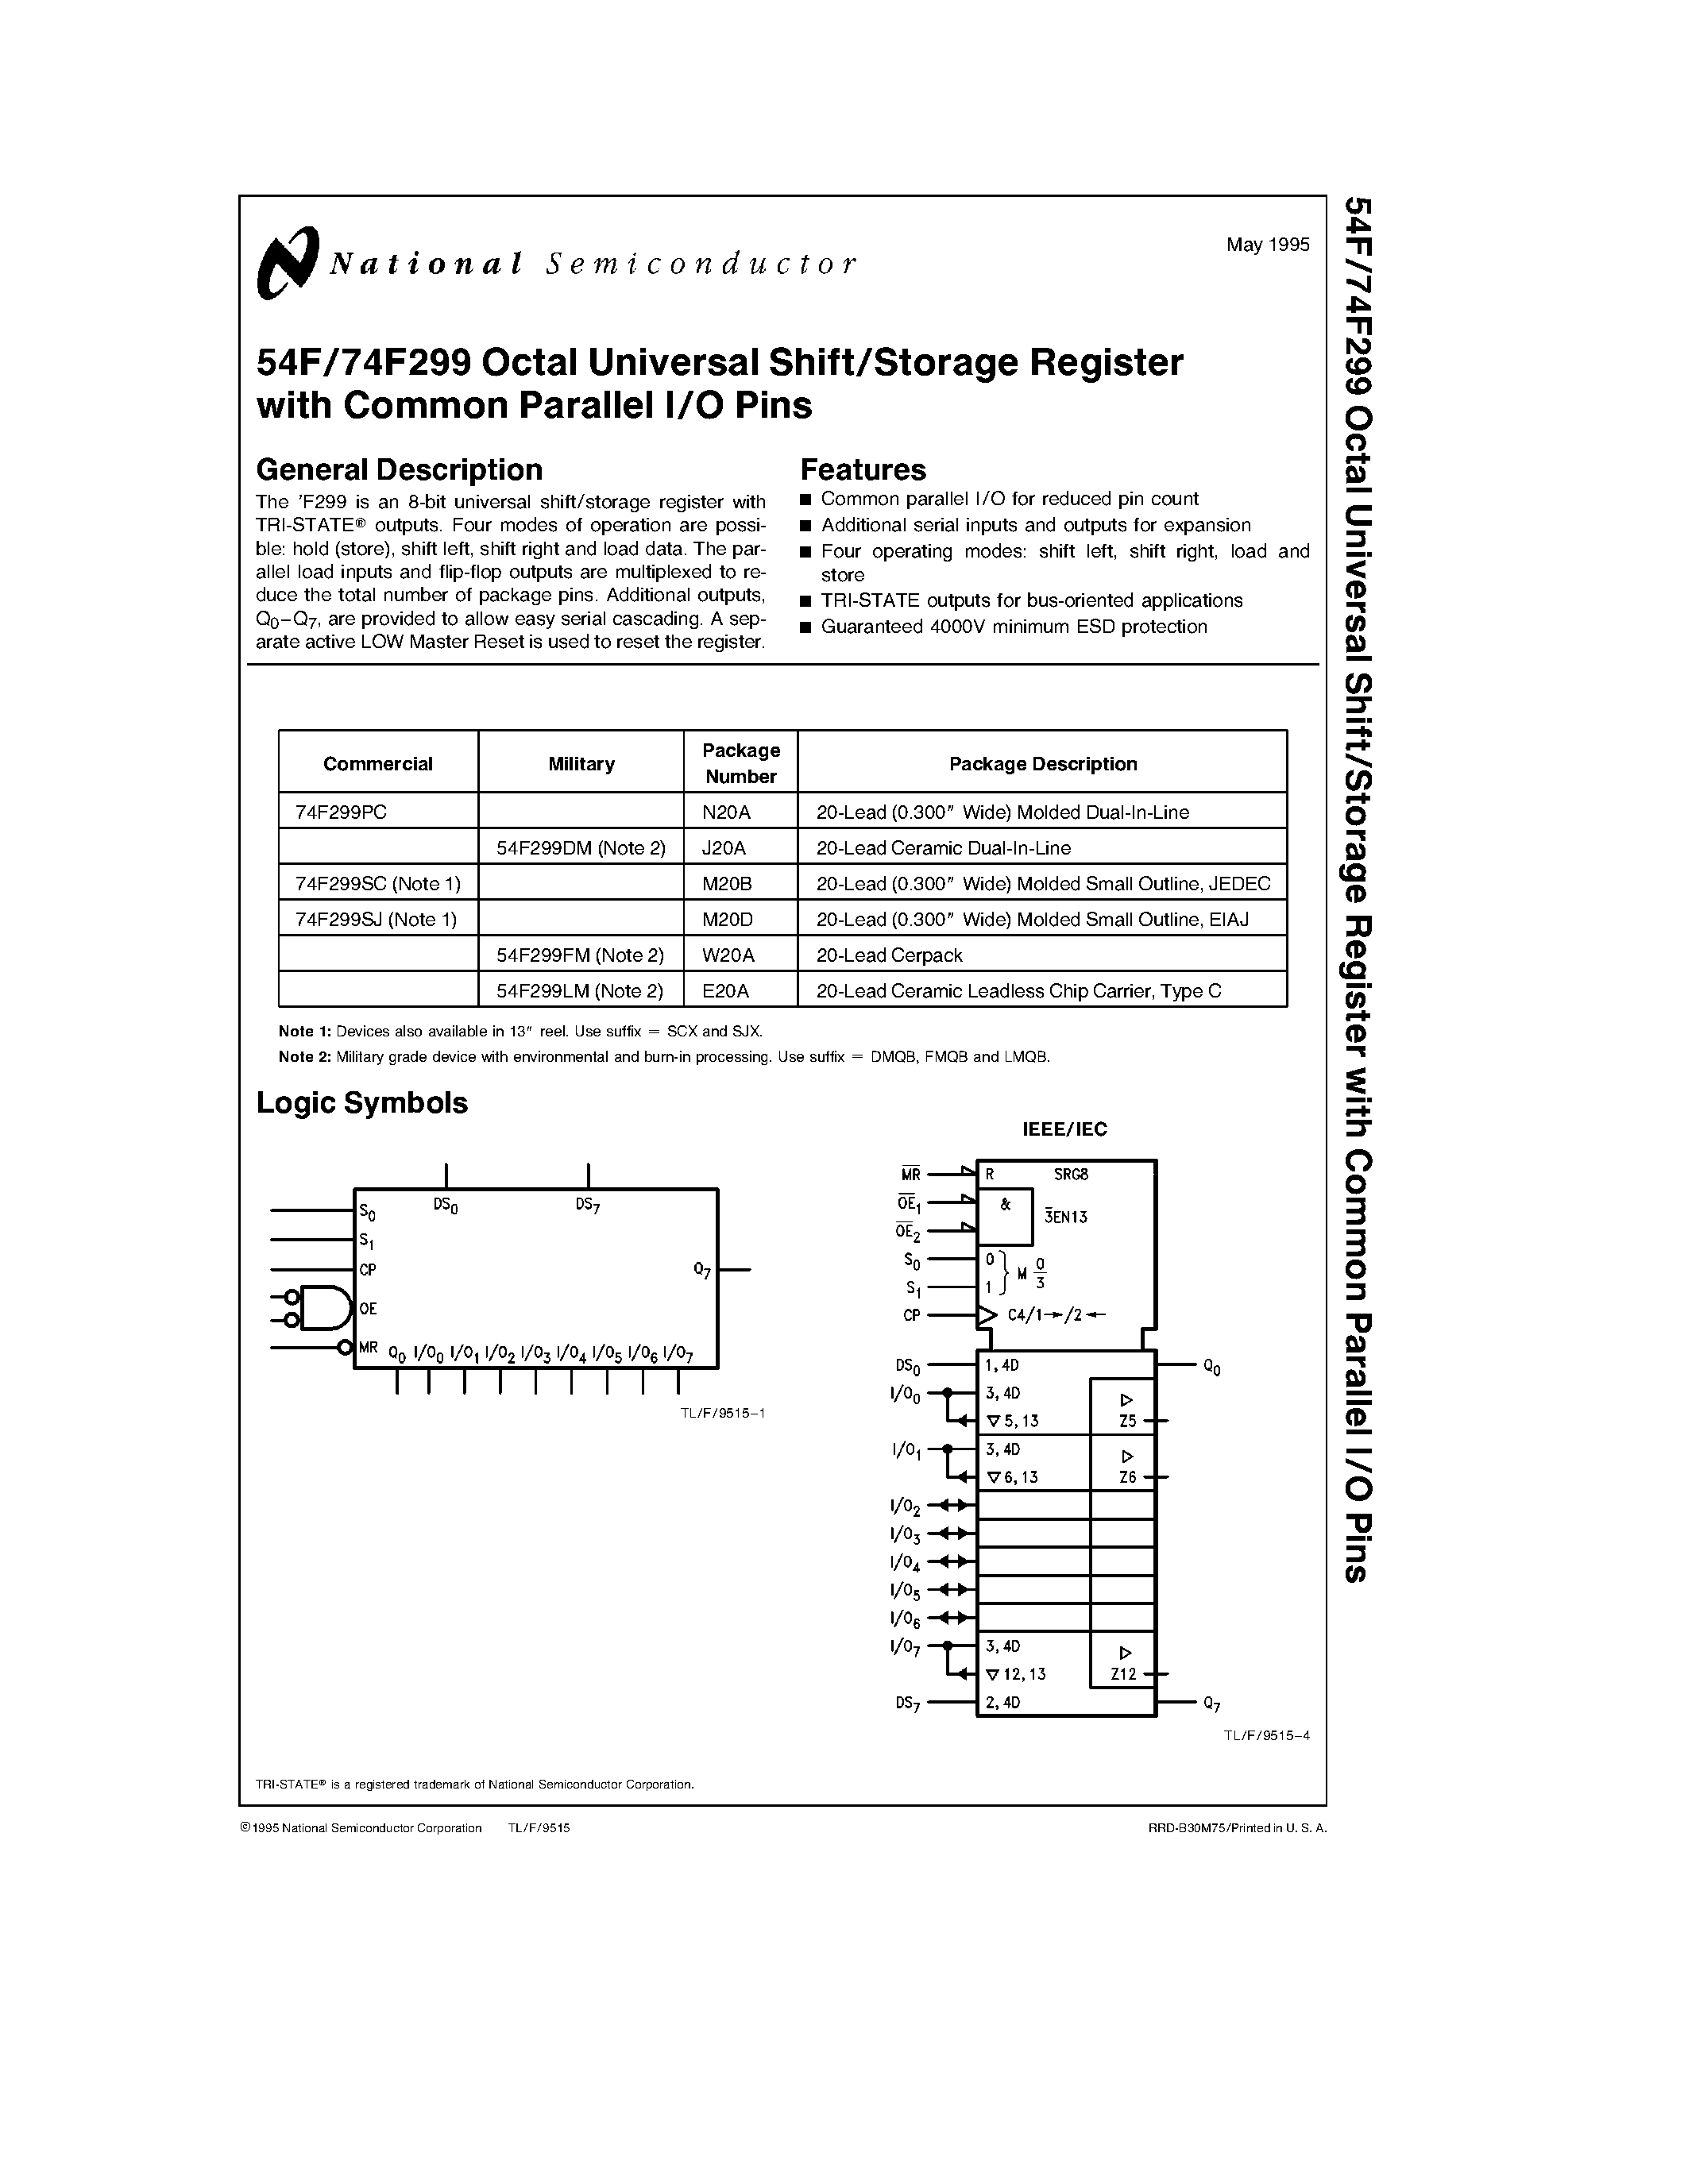 Даташит 74F299PC - Octal Universal Shift/Storage Register with Common Parallel I/O Pins страница 1